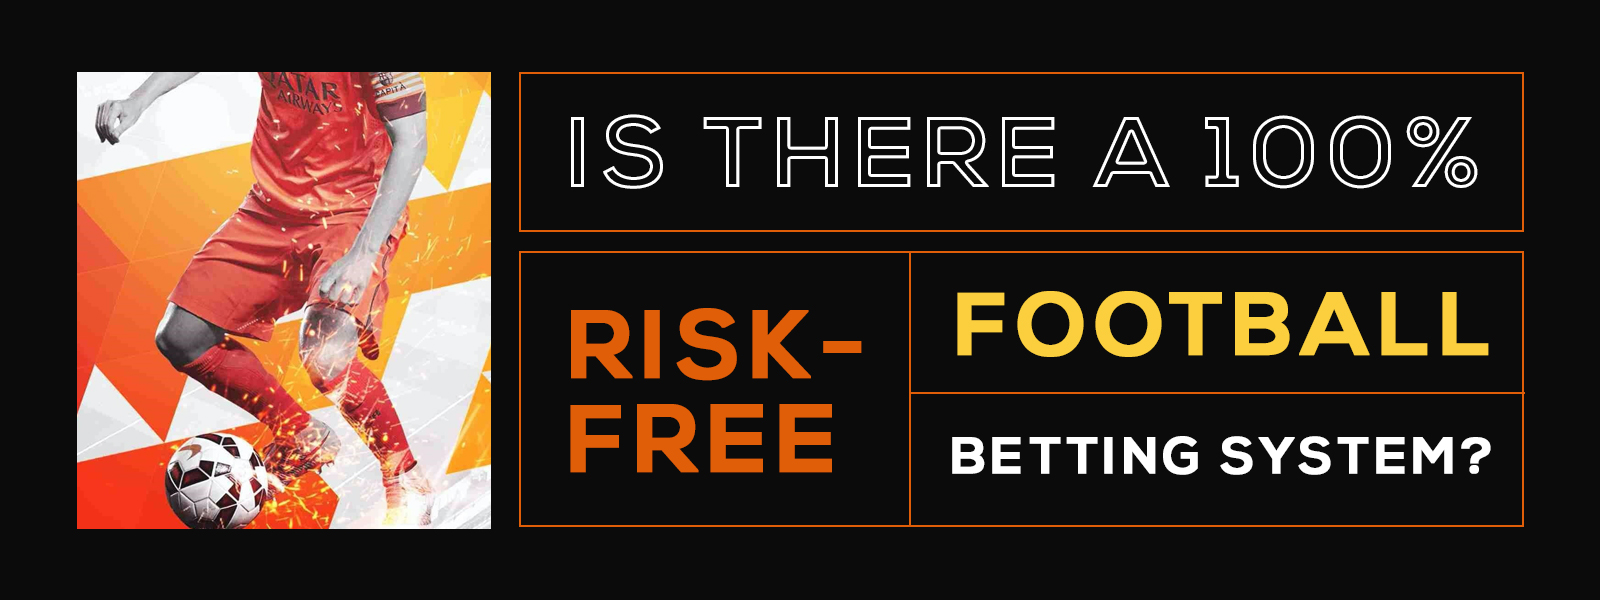 Is There A 100% Risk Free Football Betting System?